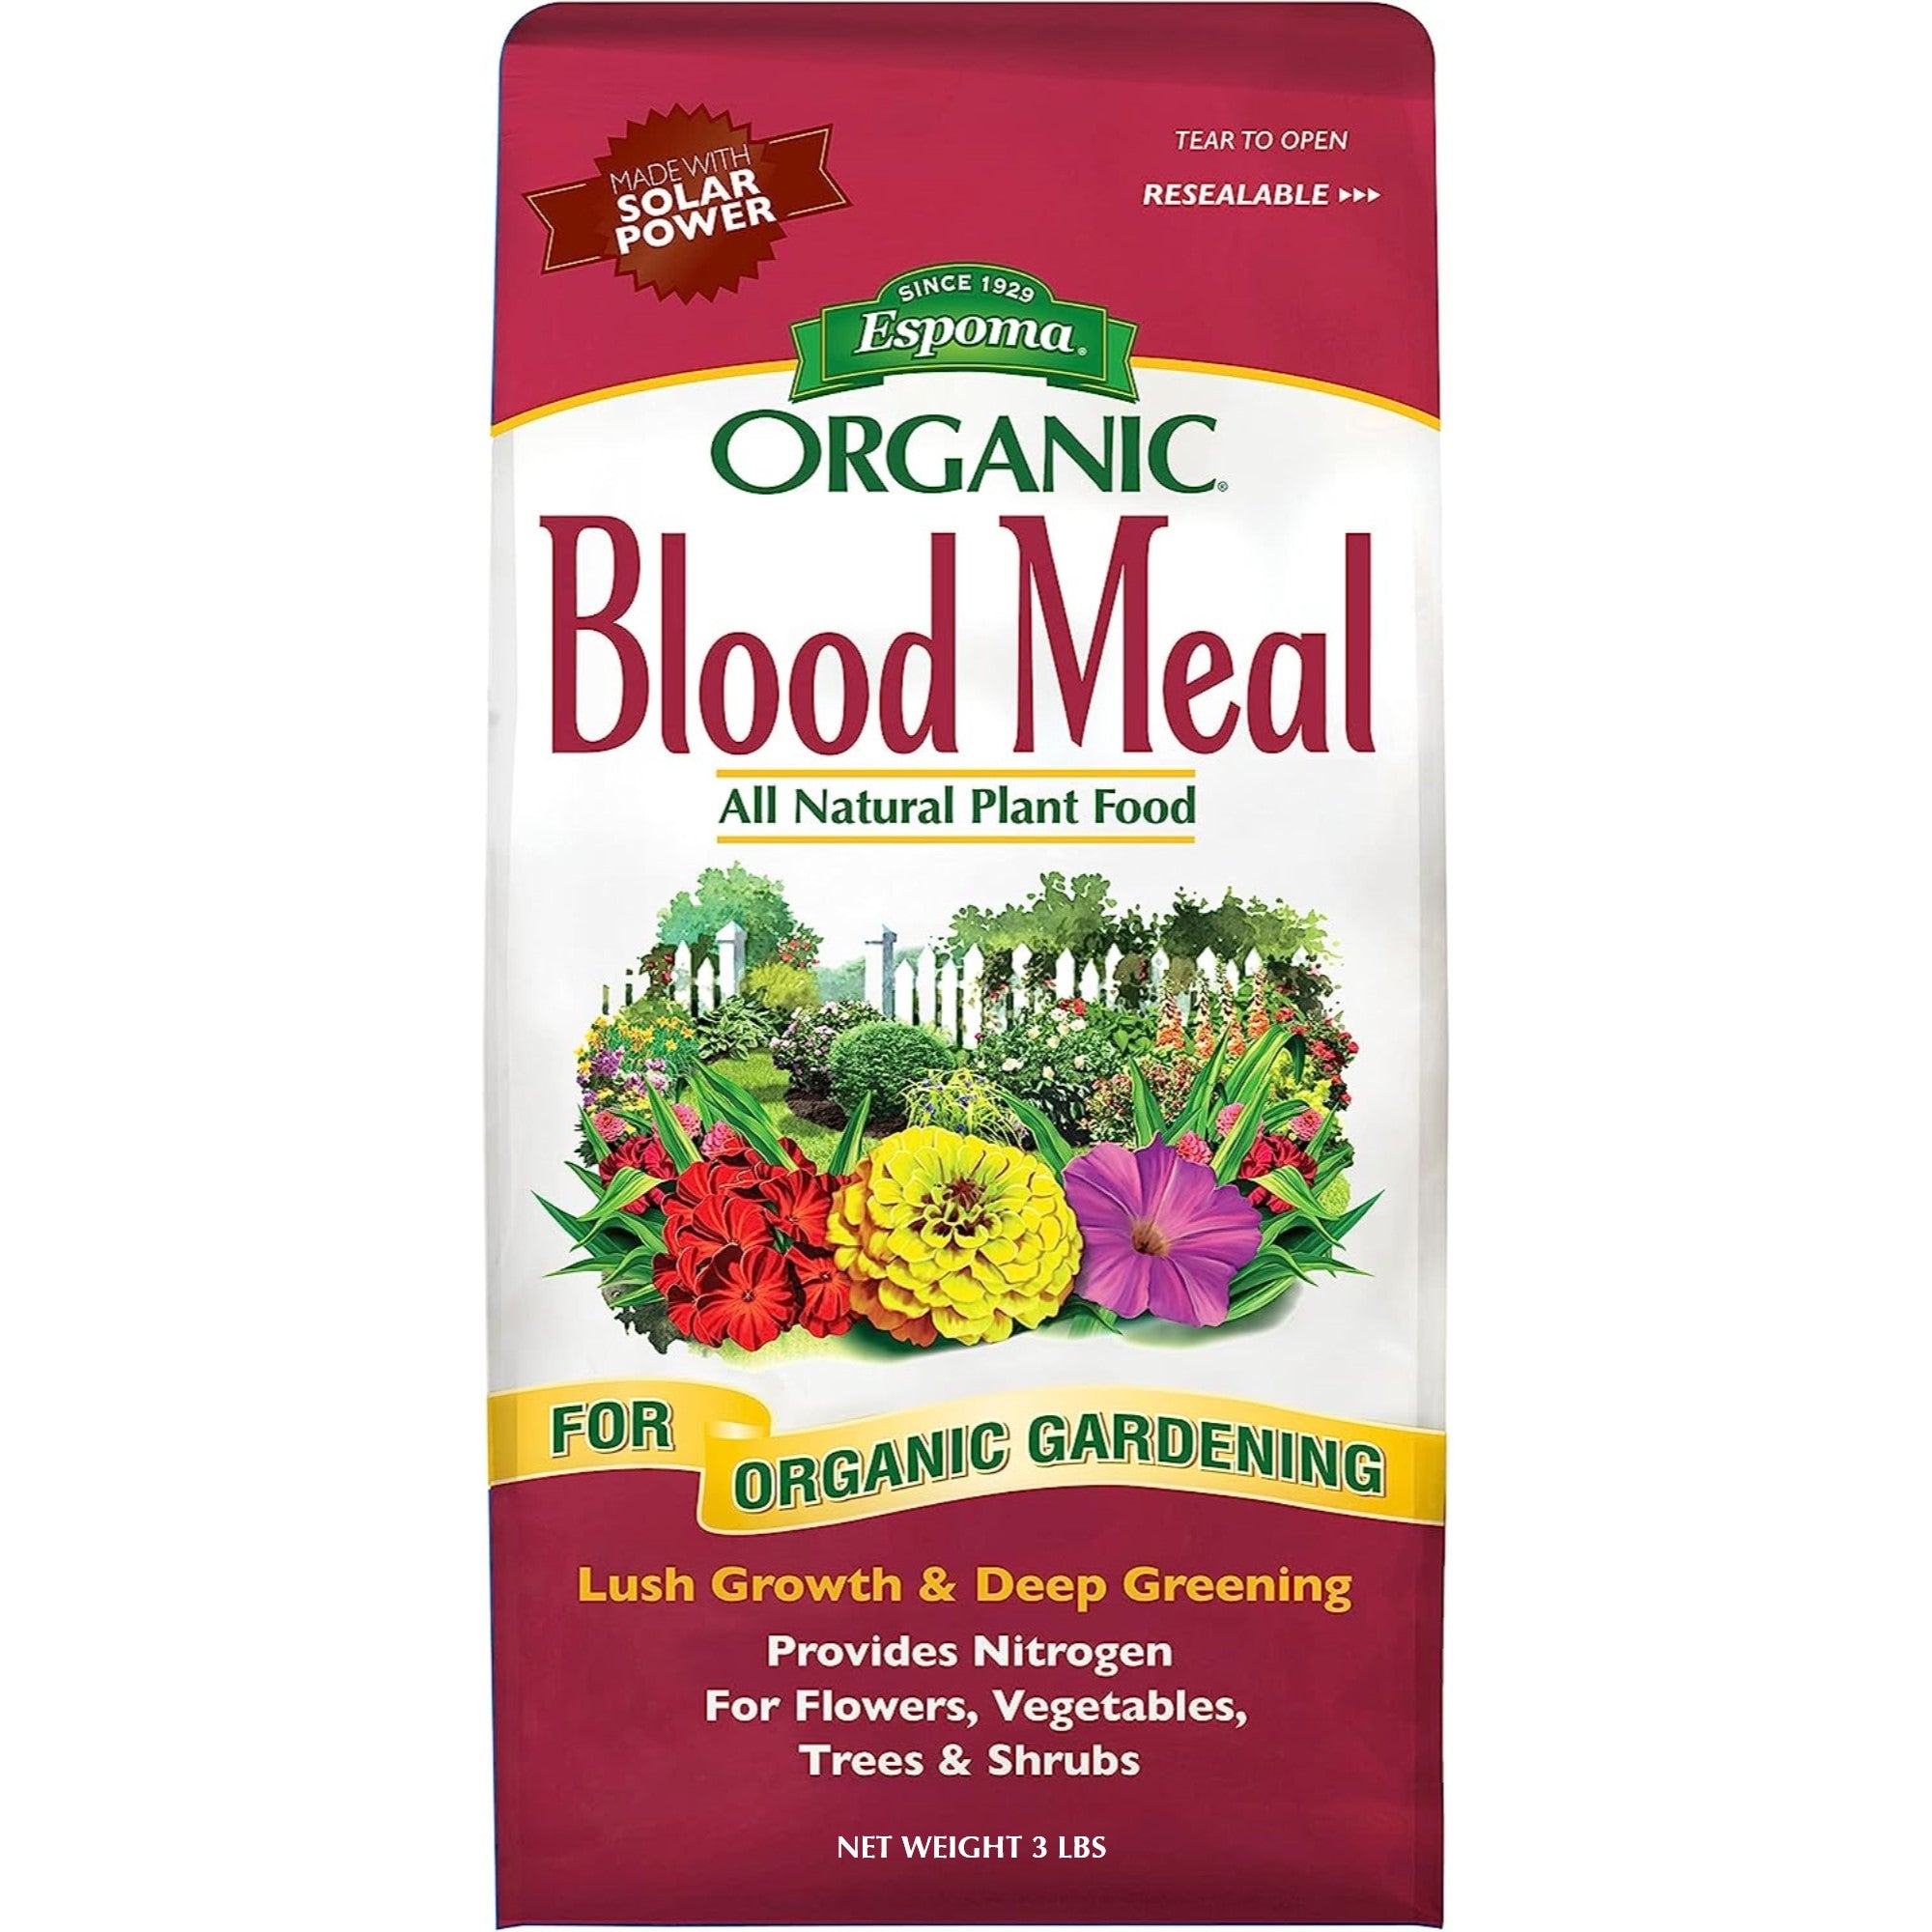 Espoma Organic Blood Meal 12-0-0 All-Natural Plant Food, Provides Nitrogen for Organic Gardening, for Flowers, Vegetables, Trees & Shrubs